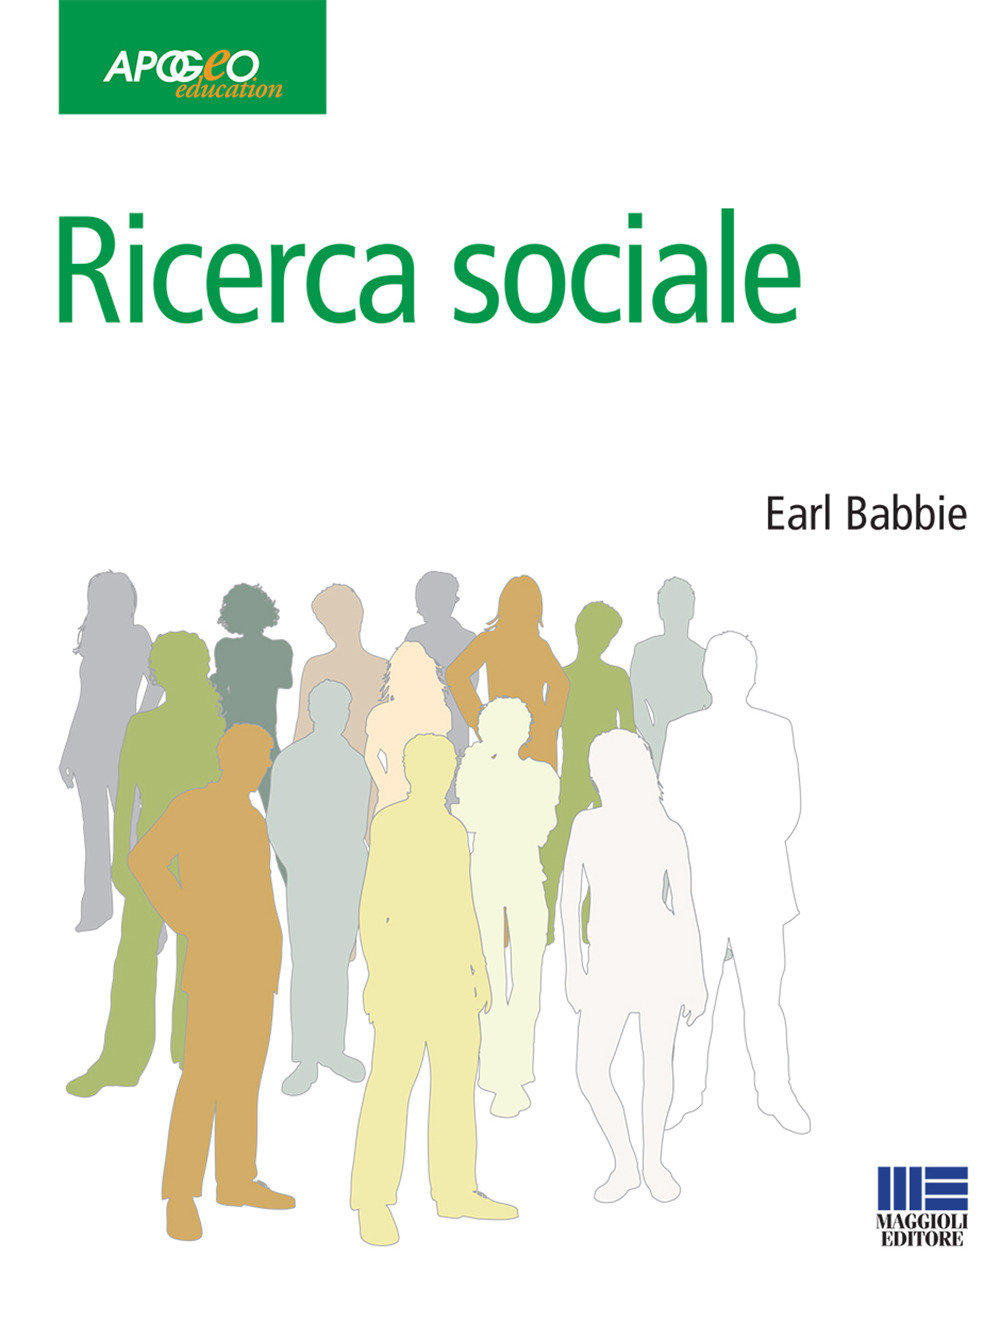 Image of Ricerca sociale